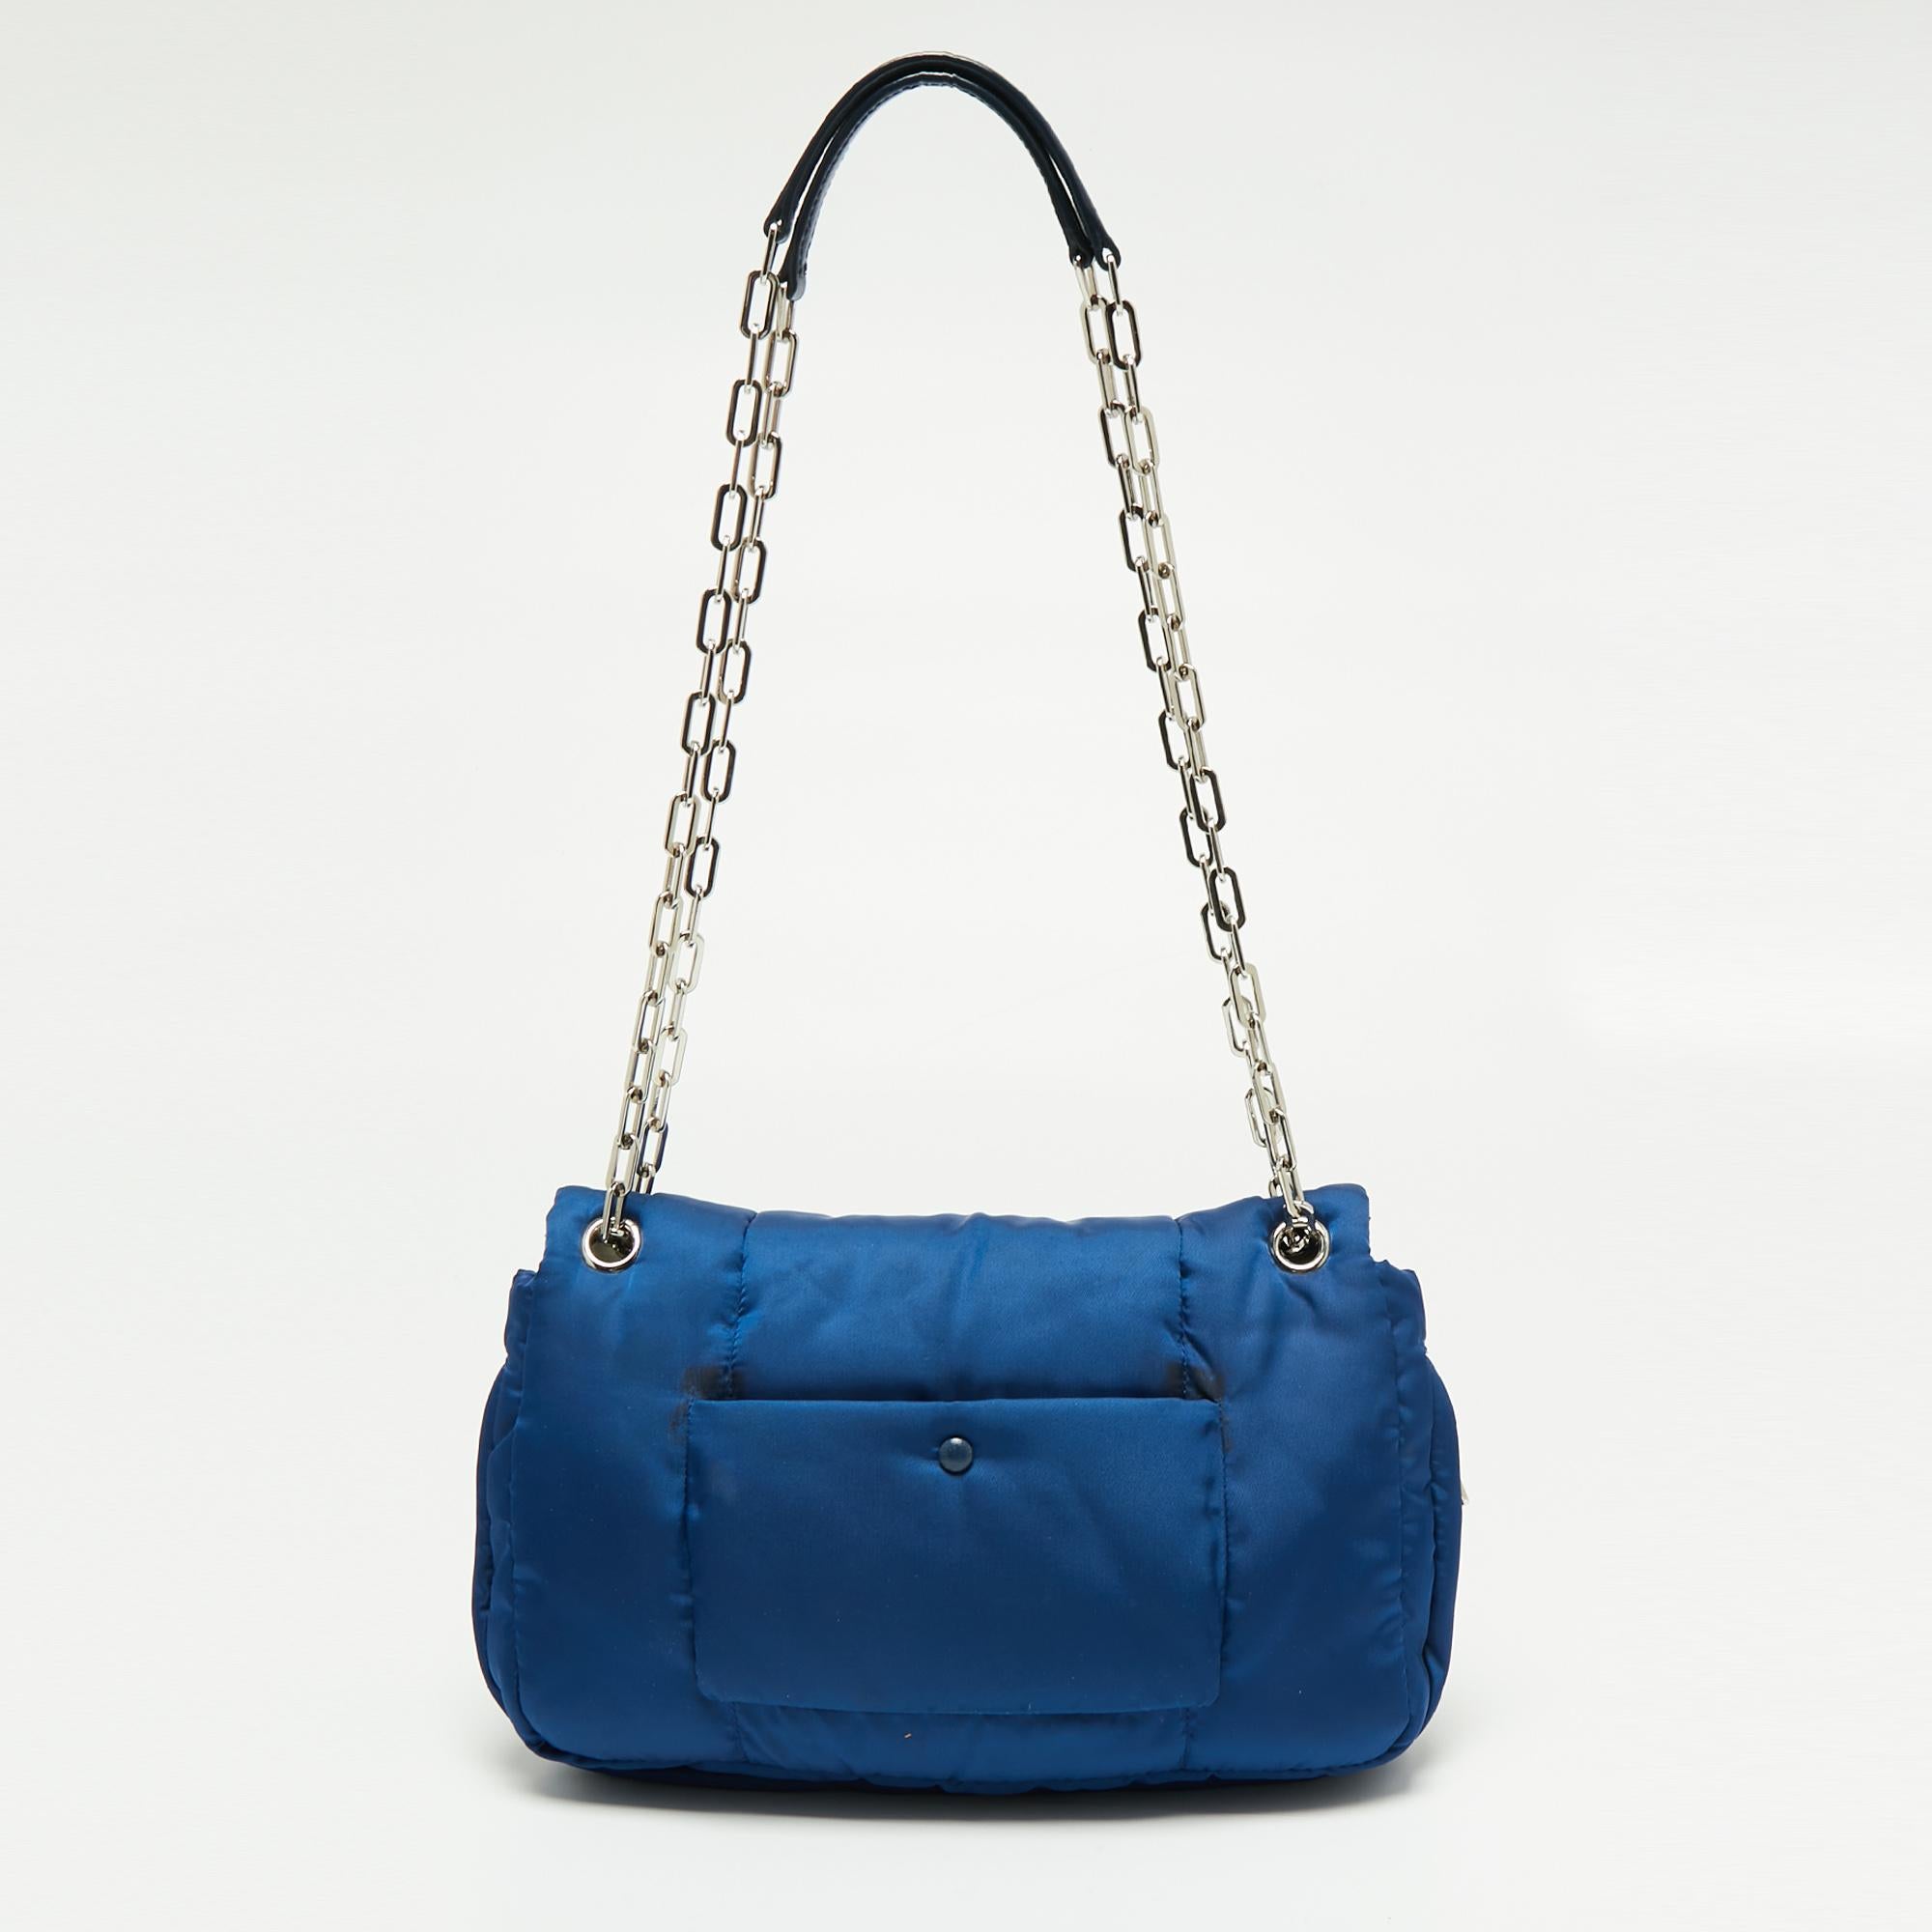 Designed perfectly for your day-to-night endeavors, this chic bag from Prada is worth every penny. Comfortable and easy to carry, this nylon creation comes in a blue shade with a brand-detailed push-lock on the front flap. It features a double